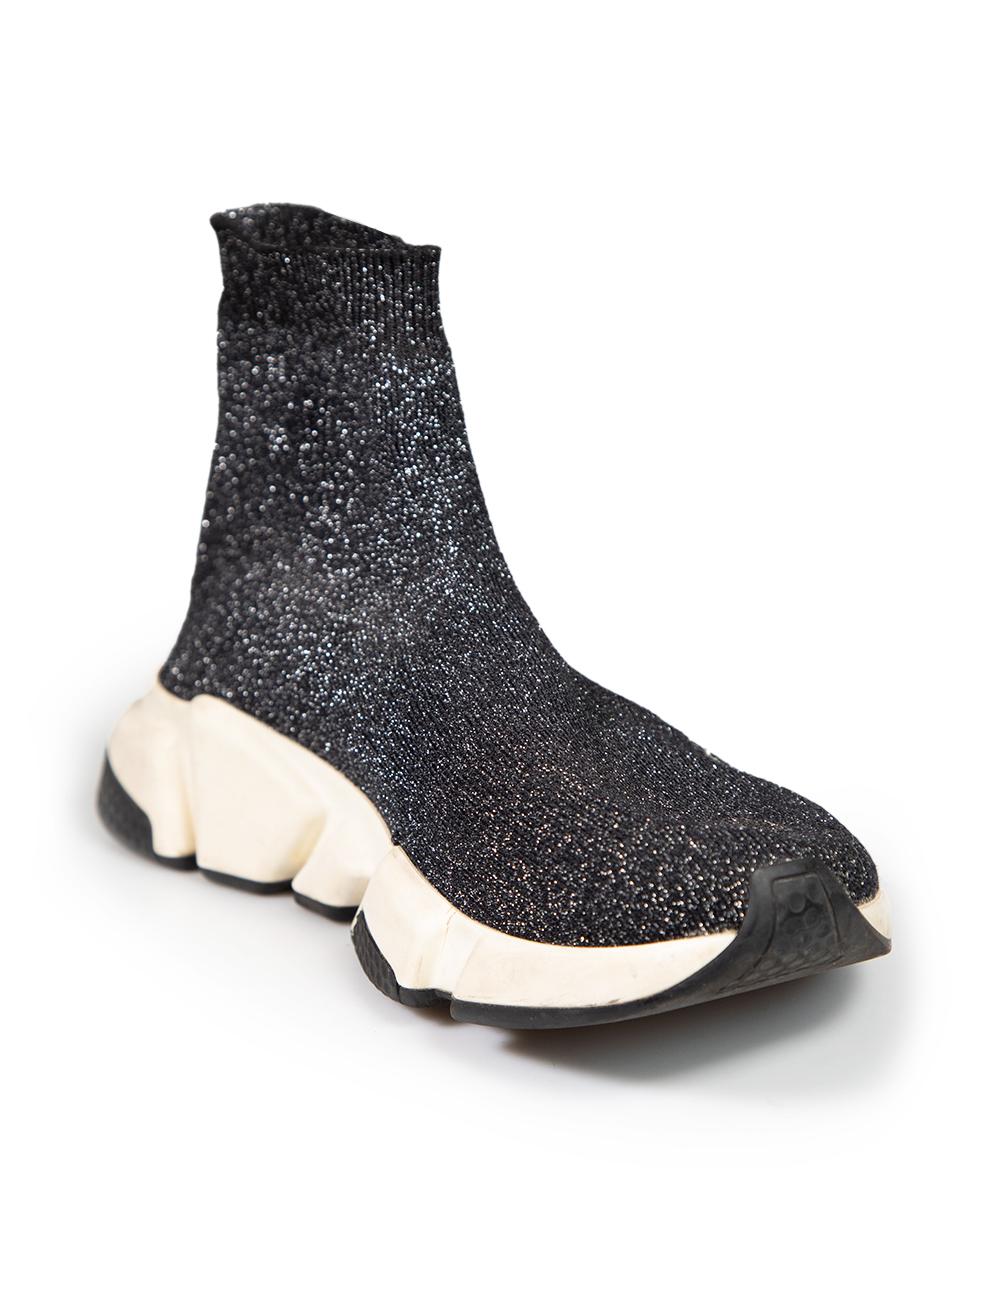 CONDITION is Good. Minor wear to trainers is evident. Light discolouration and scratches to rubber soles on both shoes on this used Balenciaga designer resale item.
 
 
 
 Details
 
 
 Model: Speed
 
 Black
 
 Cloth textile
 
 Sock trainers
 
